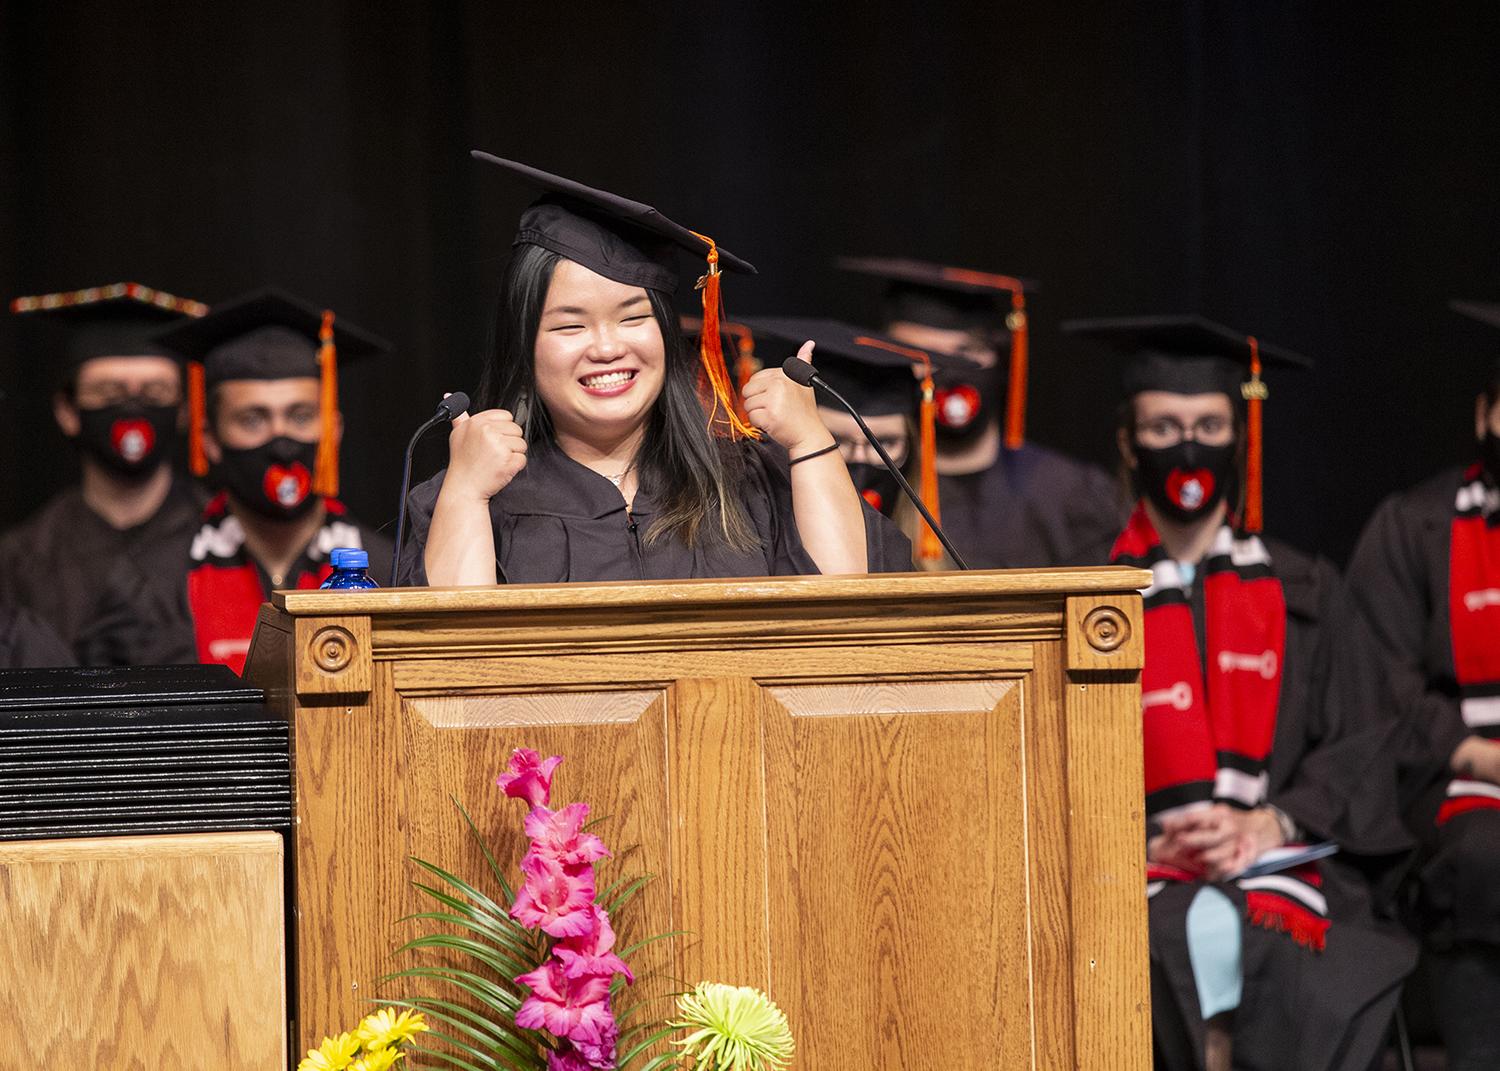 graduate speaker Adele gives two thumbs up on stage